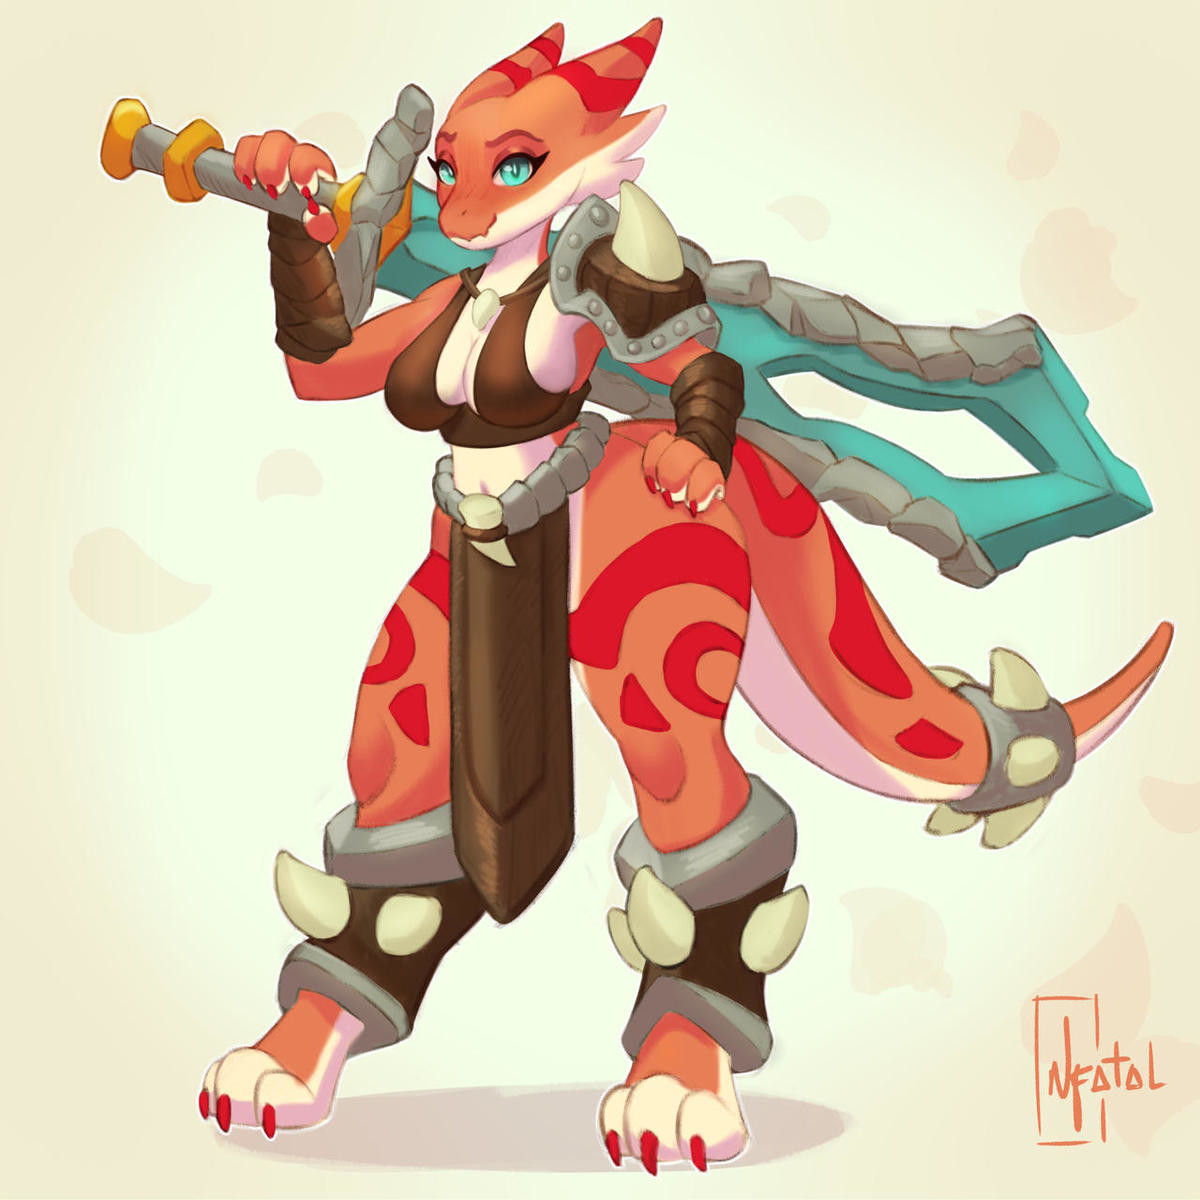 Kobold squad. nfatal/gallery/all nfatal/gallery/all.. I played as a kobold briefly in a pathfinder game, had always thought they were gross, ugly creatures. But when I was sifting through character art, the amount 